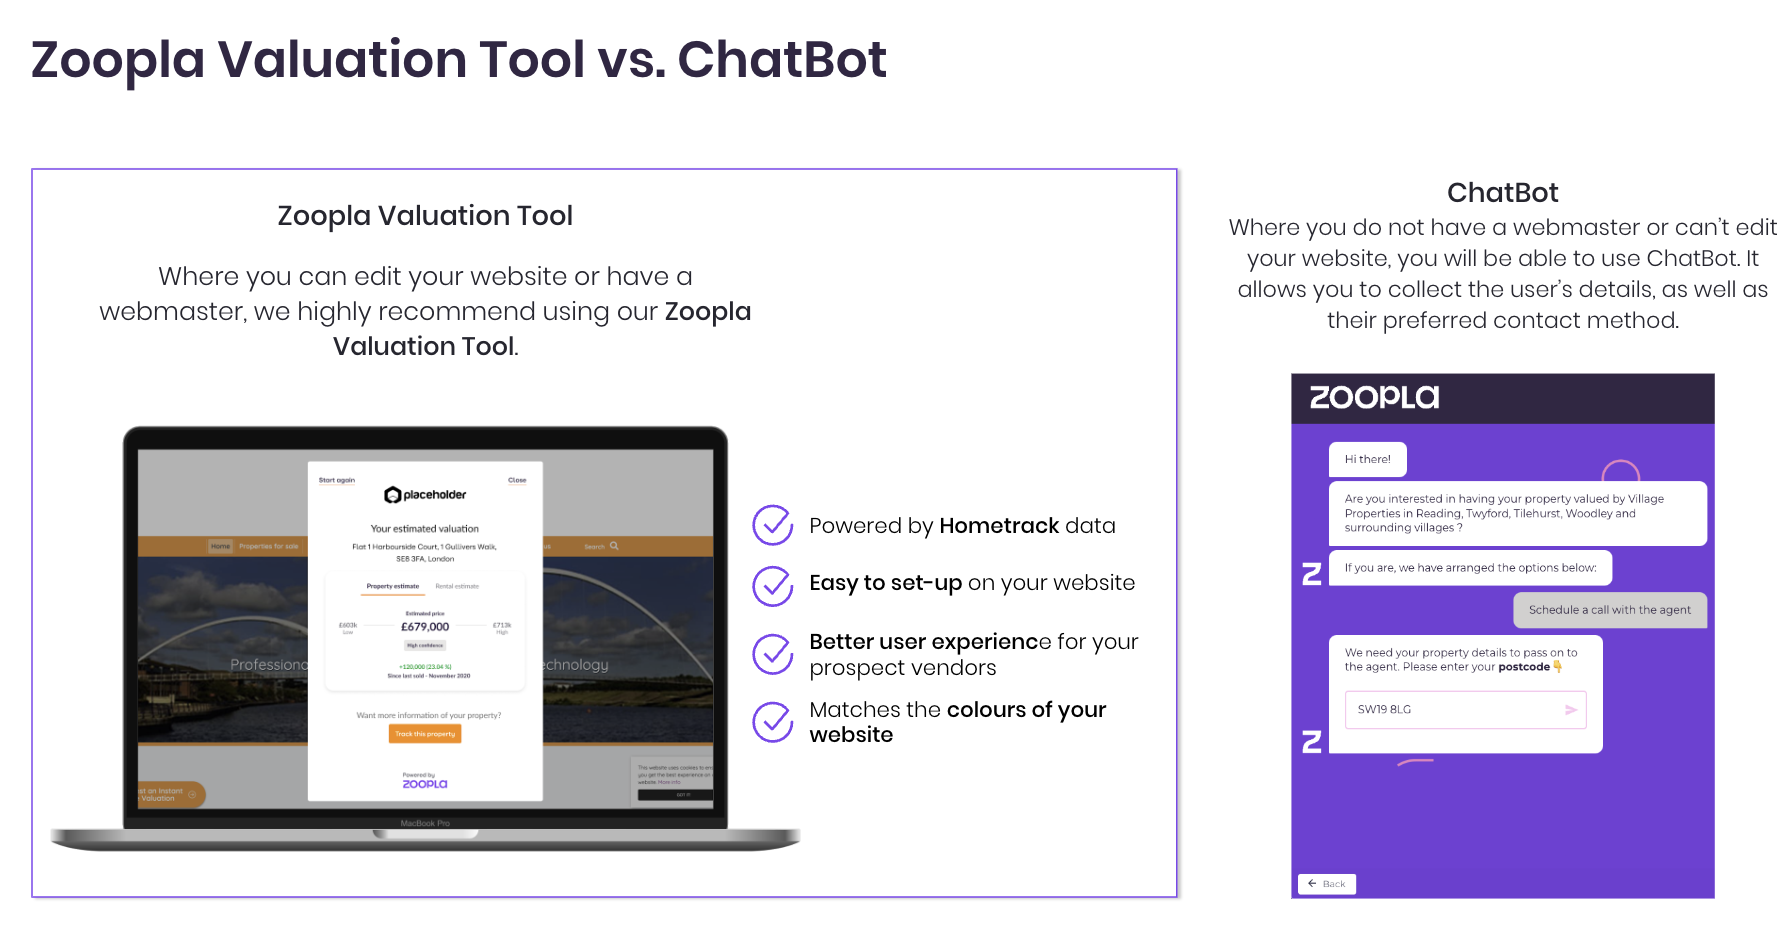 Zoopla_Valuation_Tool_vs_Chatbot.png